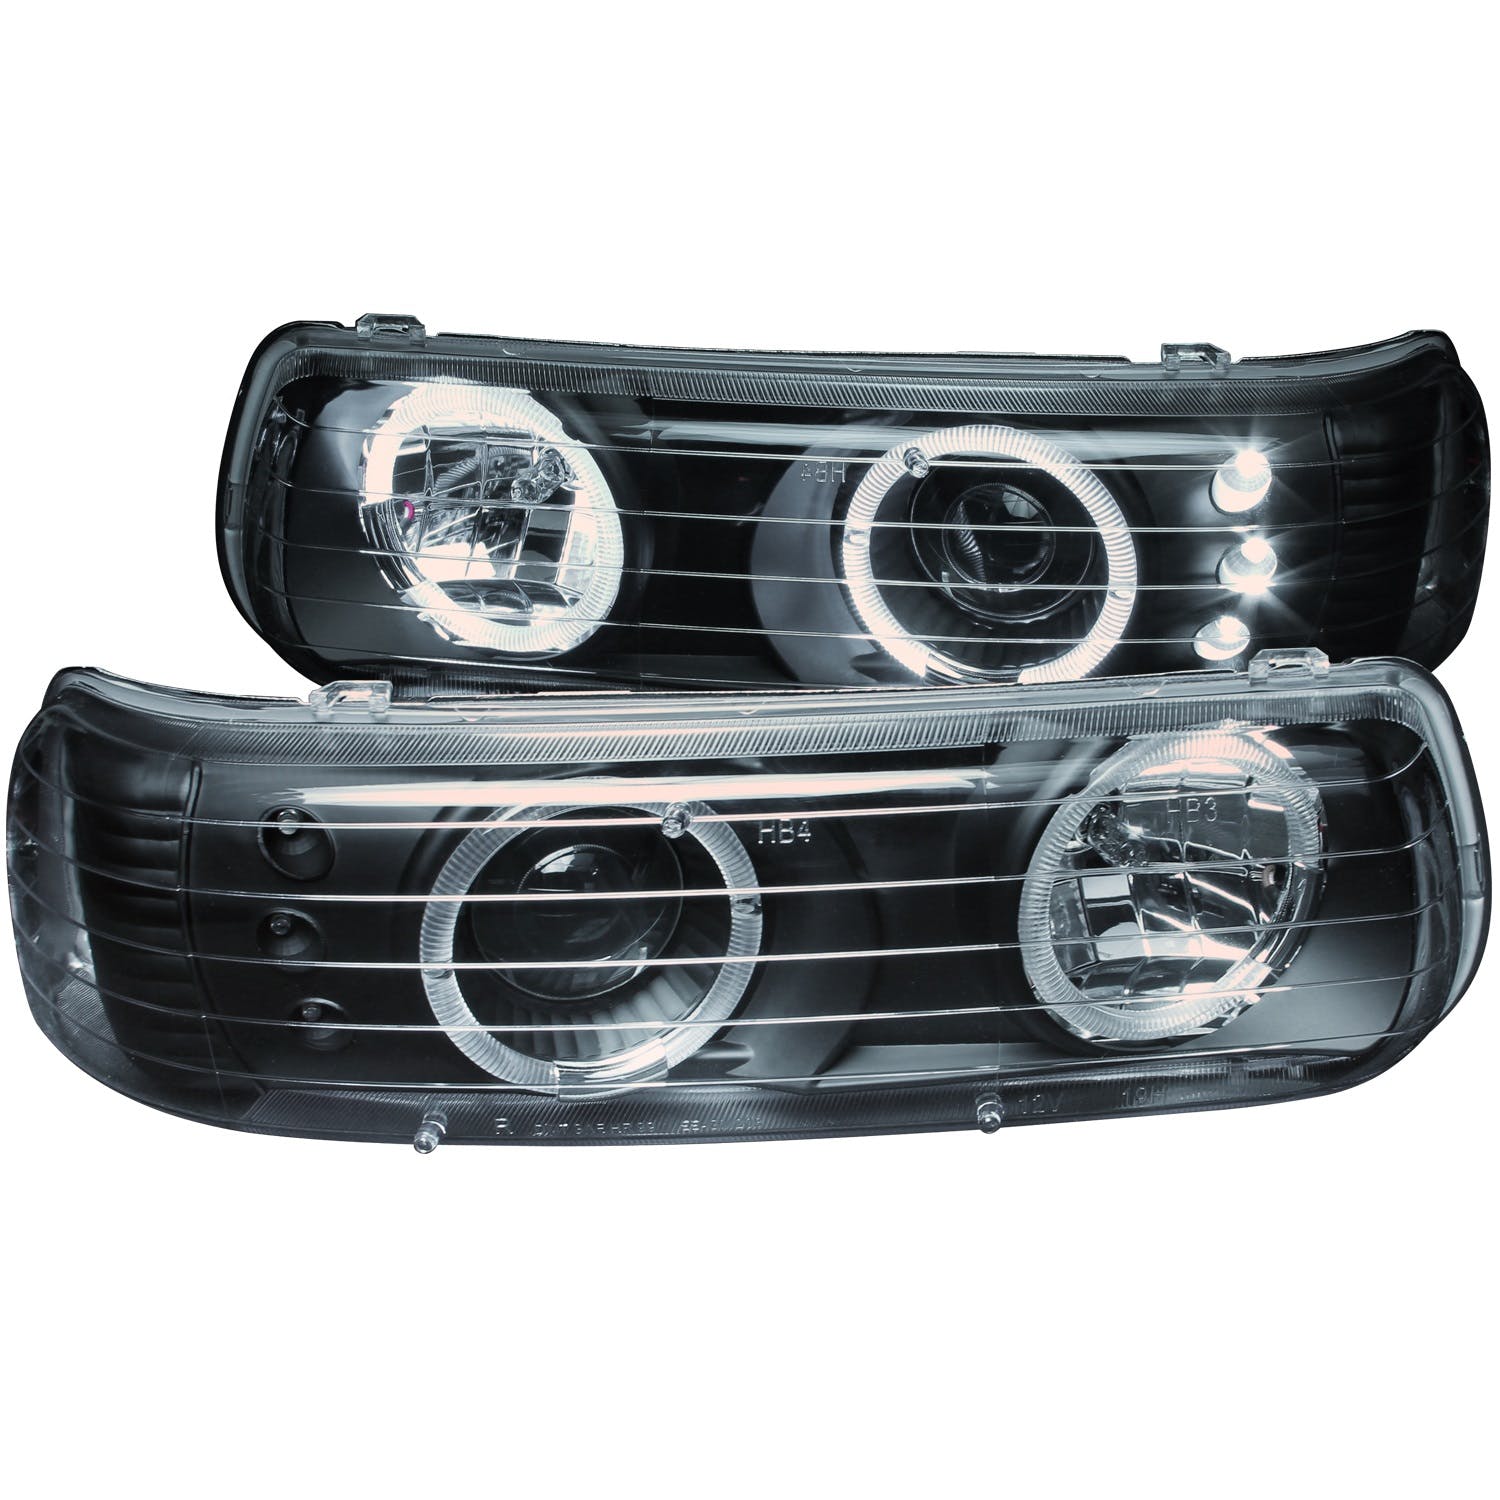 AnzoUSA 111189 Projector Headlights with Halo Black